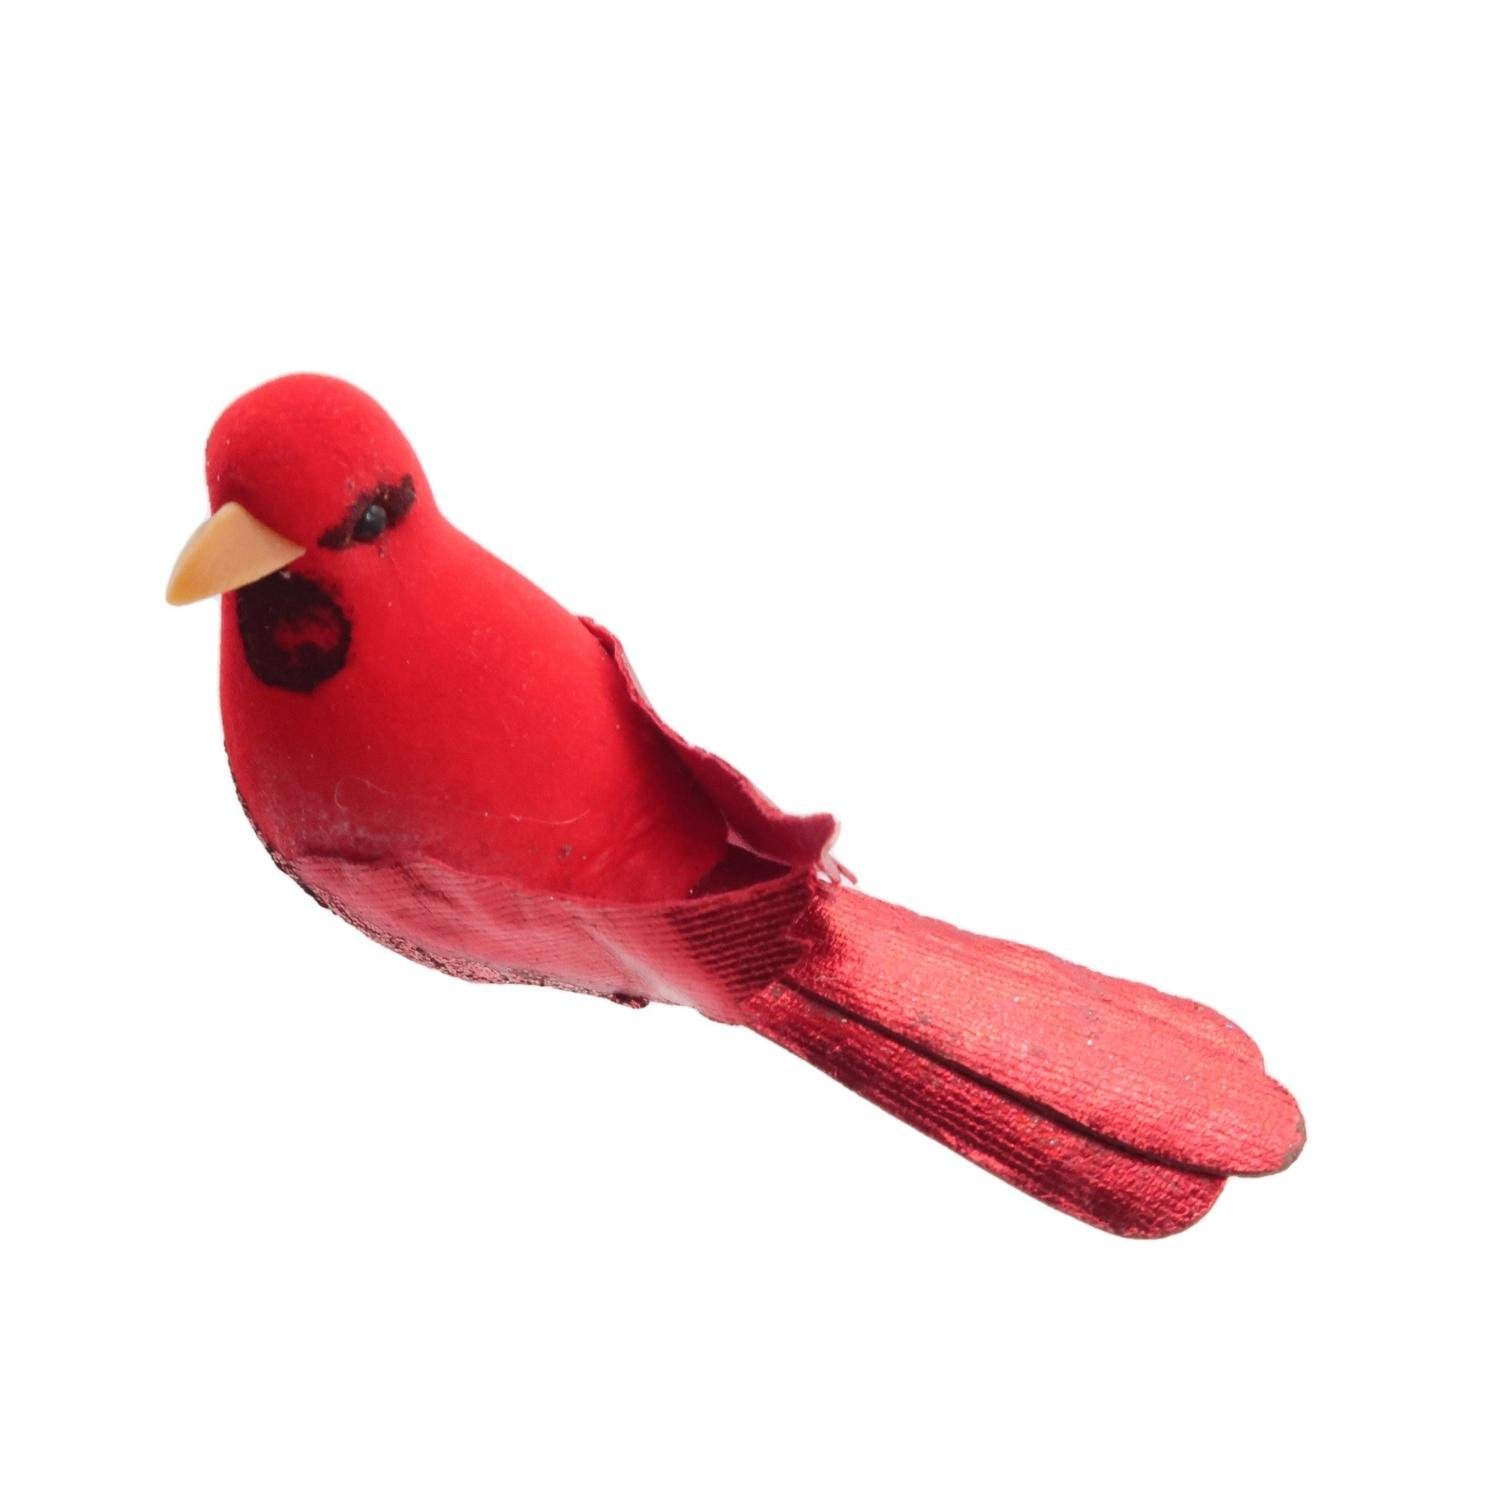 Small Red Bird Christmas Ornaments